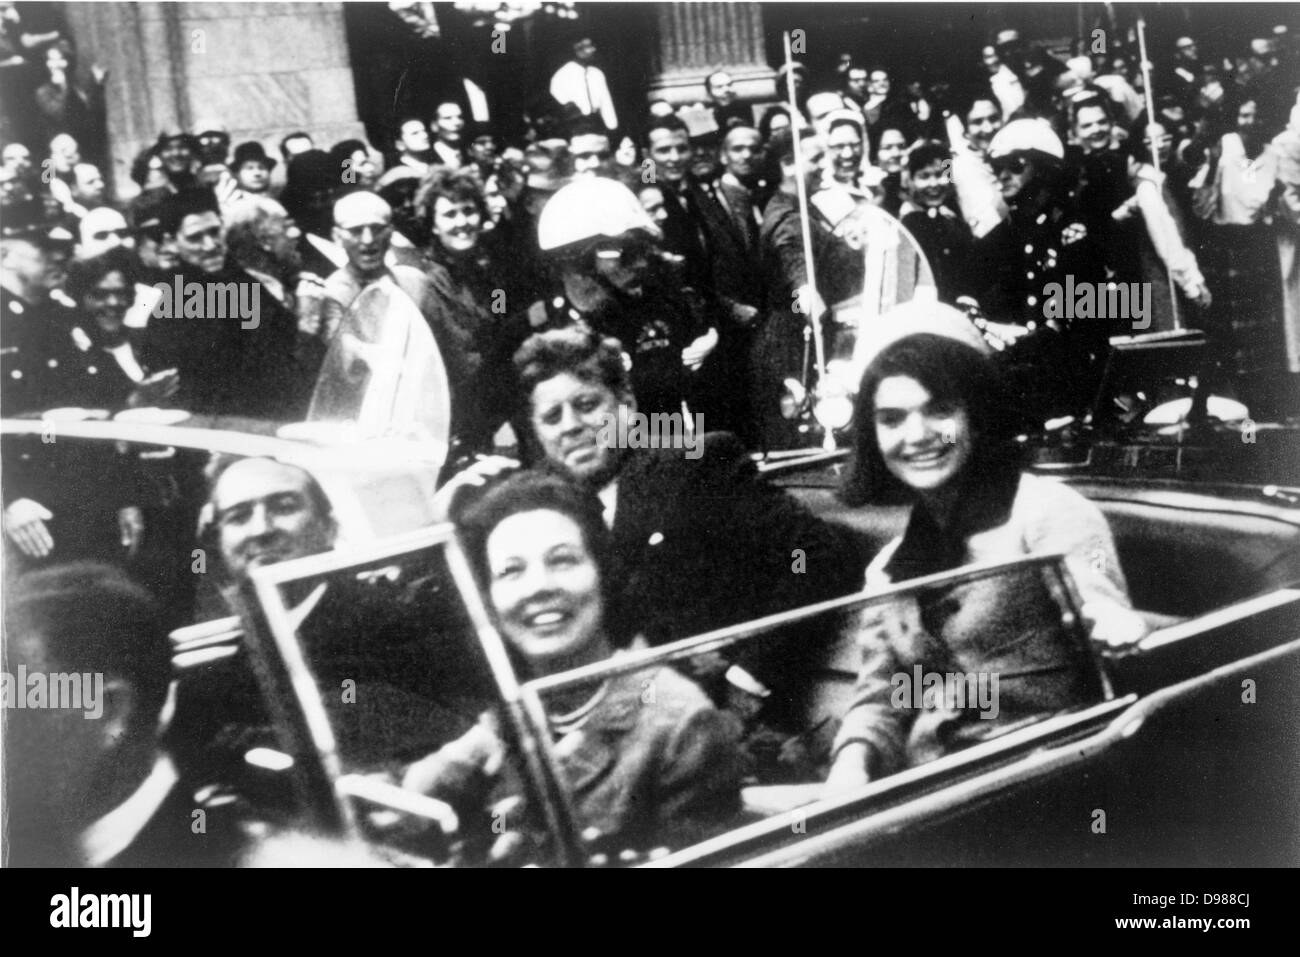 John F Kennedy motorcade, Dallas, Texas USA, 22 November 1963. Close-up view of President and Mrs Kennedy and Texas Governor John Connally and his wife. Photographer: Victor Hugo King. Stock Photo